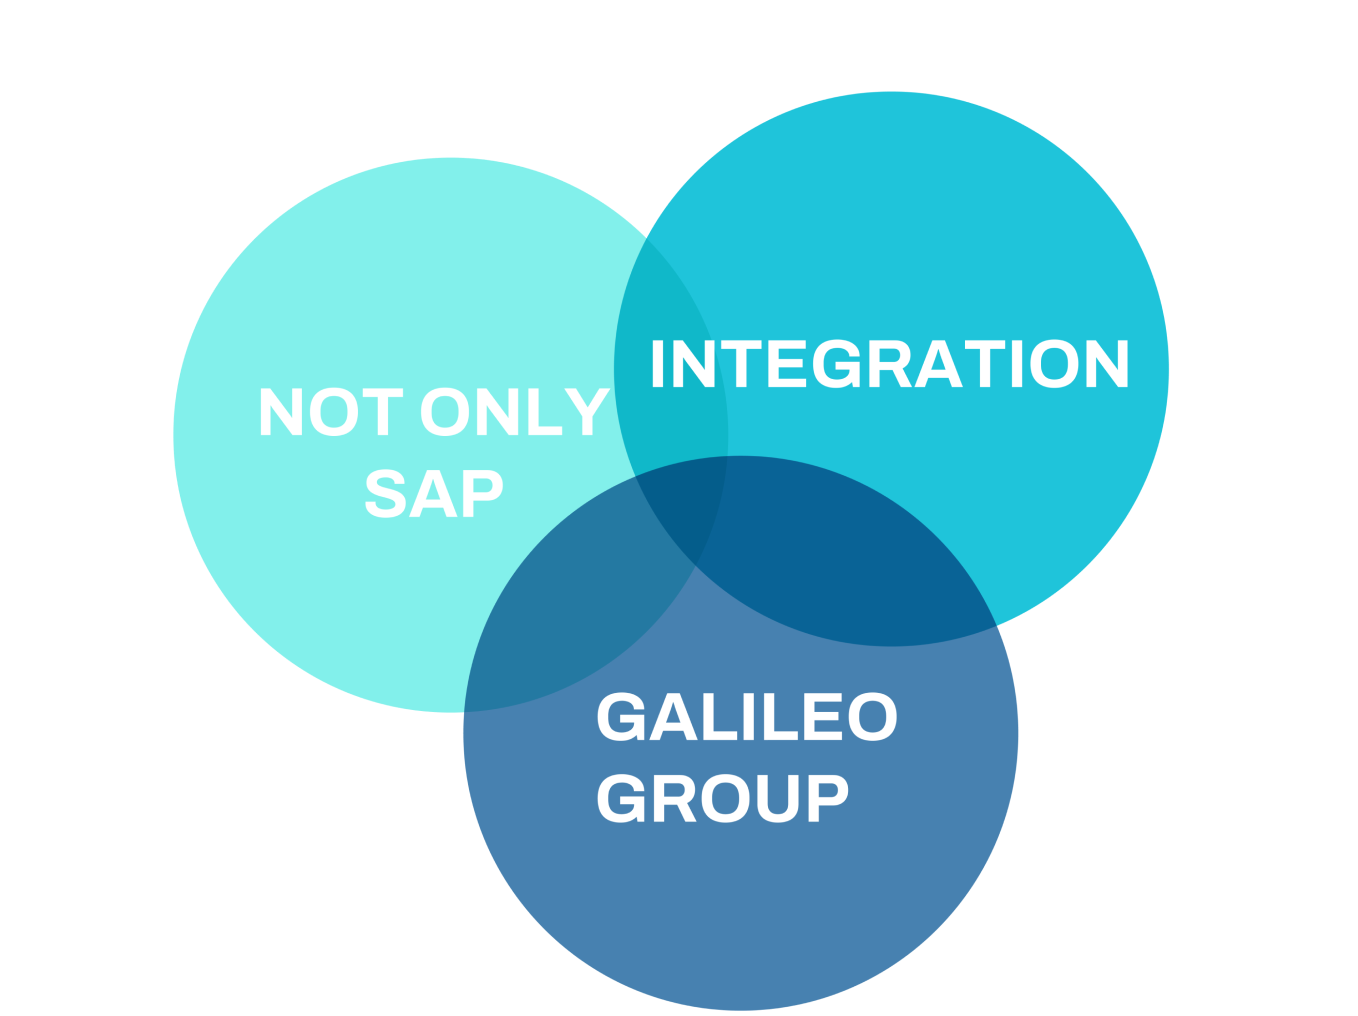 Not only SAP integration Galileo Group